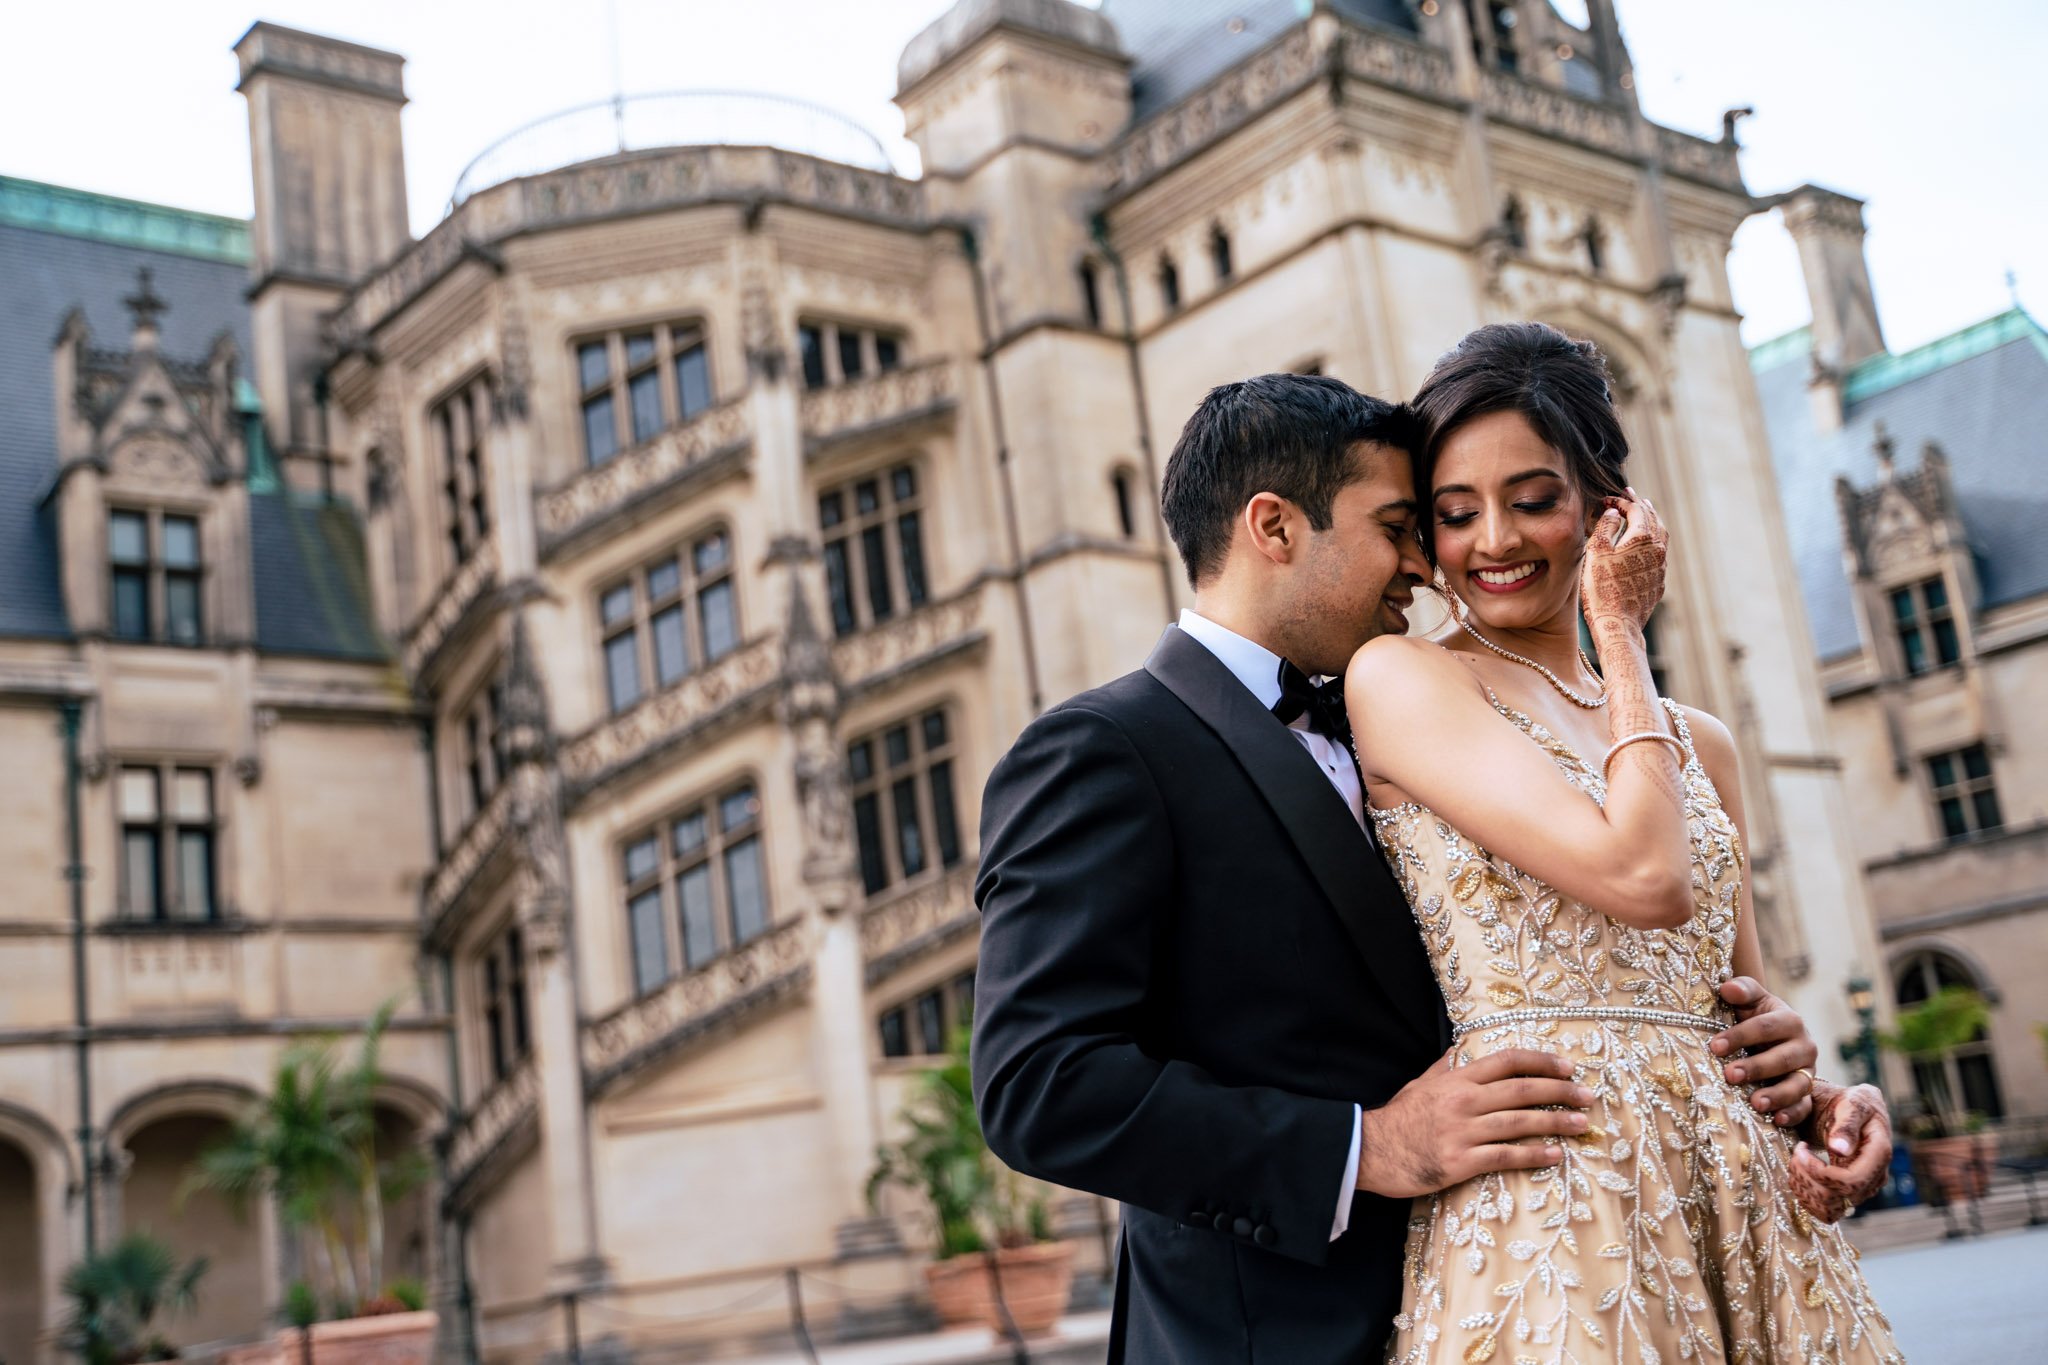 A bride and groom embracing in front of the Biltmore Estate.